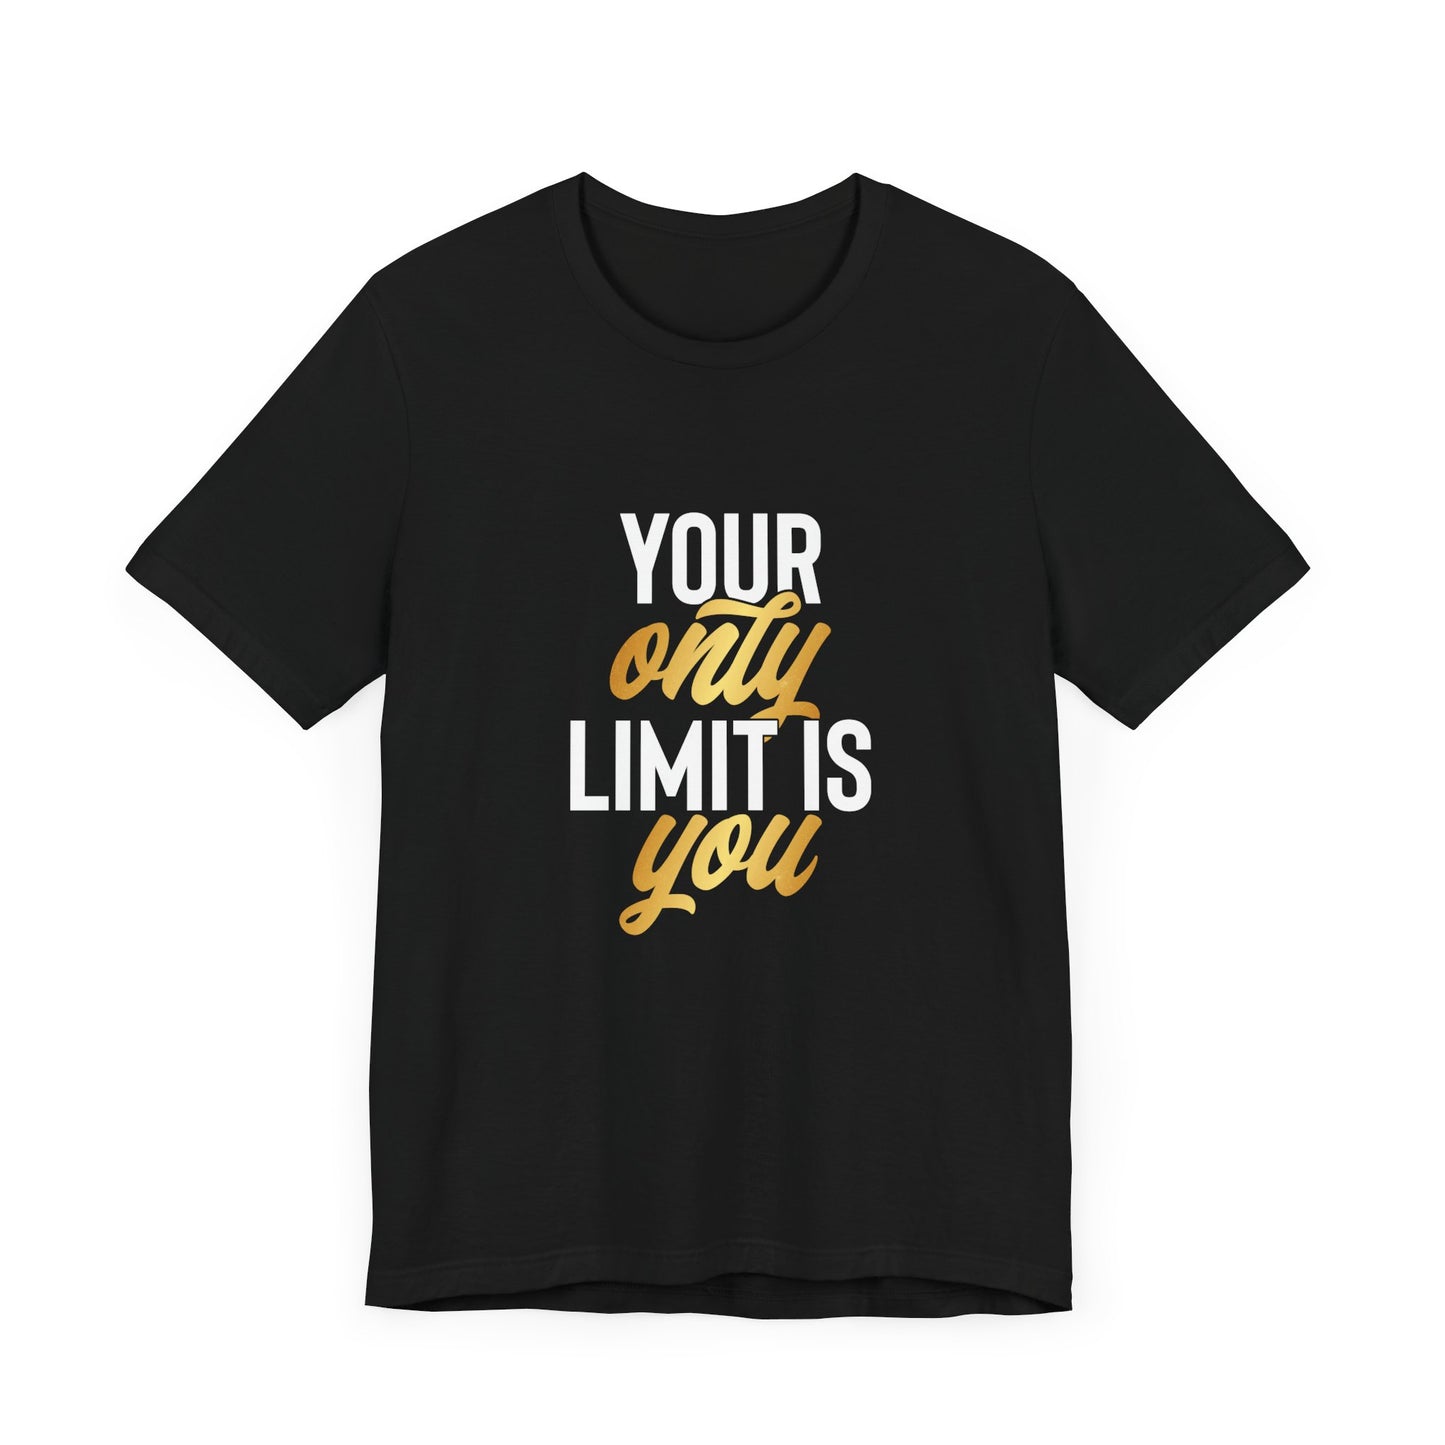 Your Only Limit is You - T-shirt - Motivational T-shirt for Personal Growth